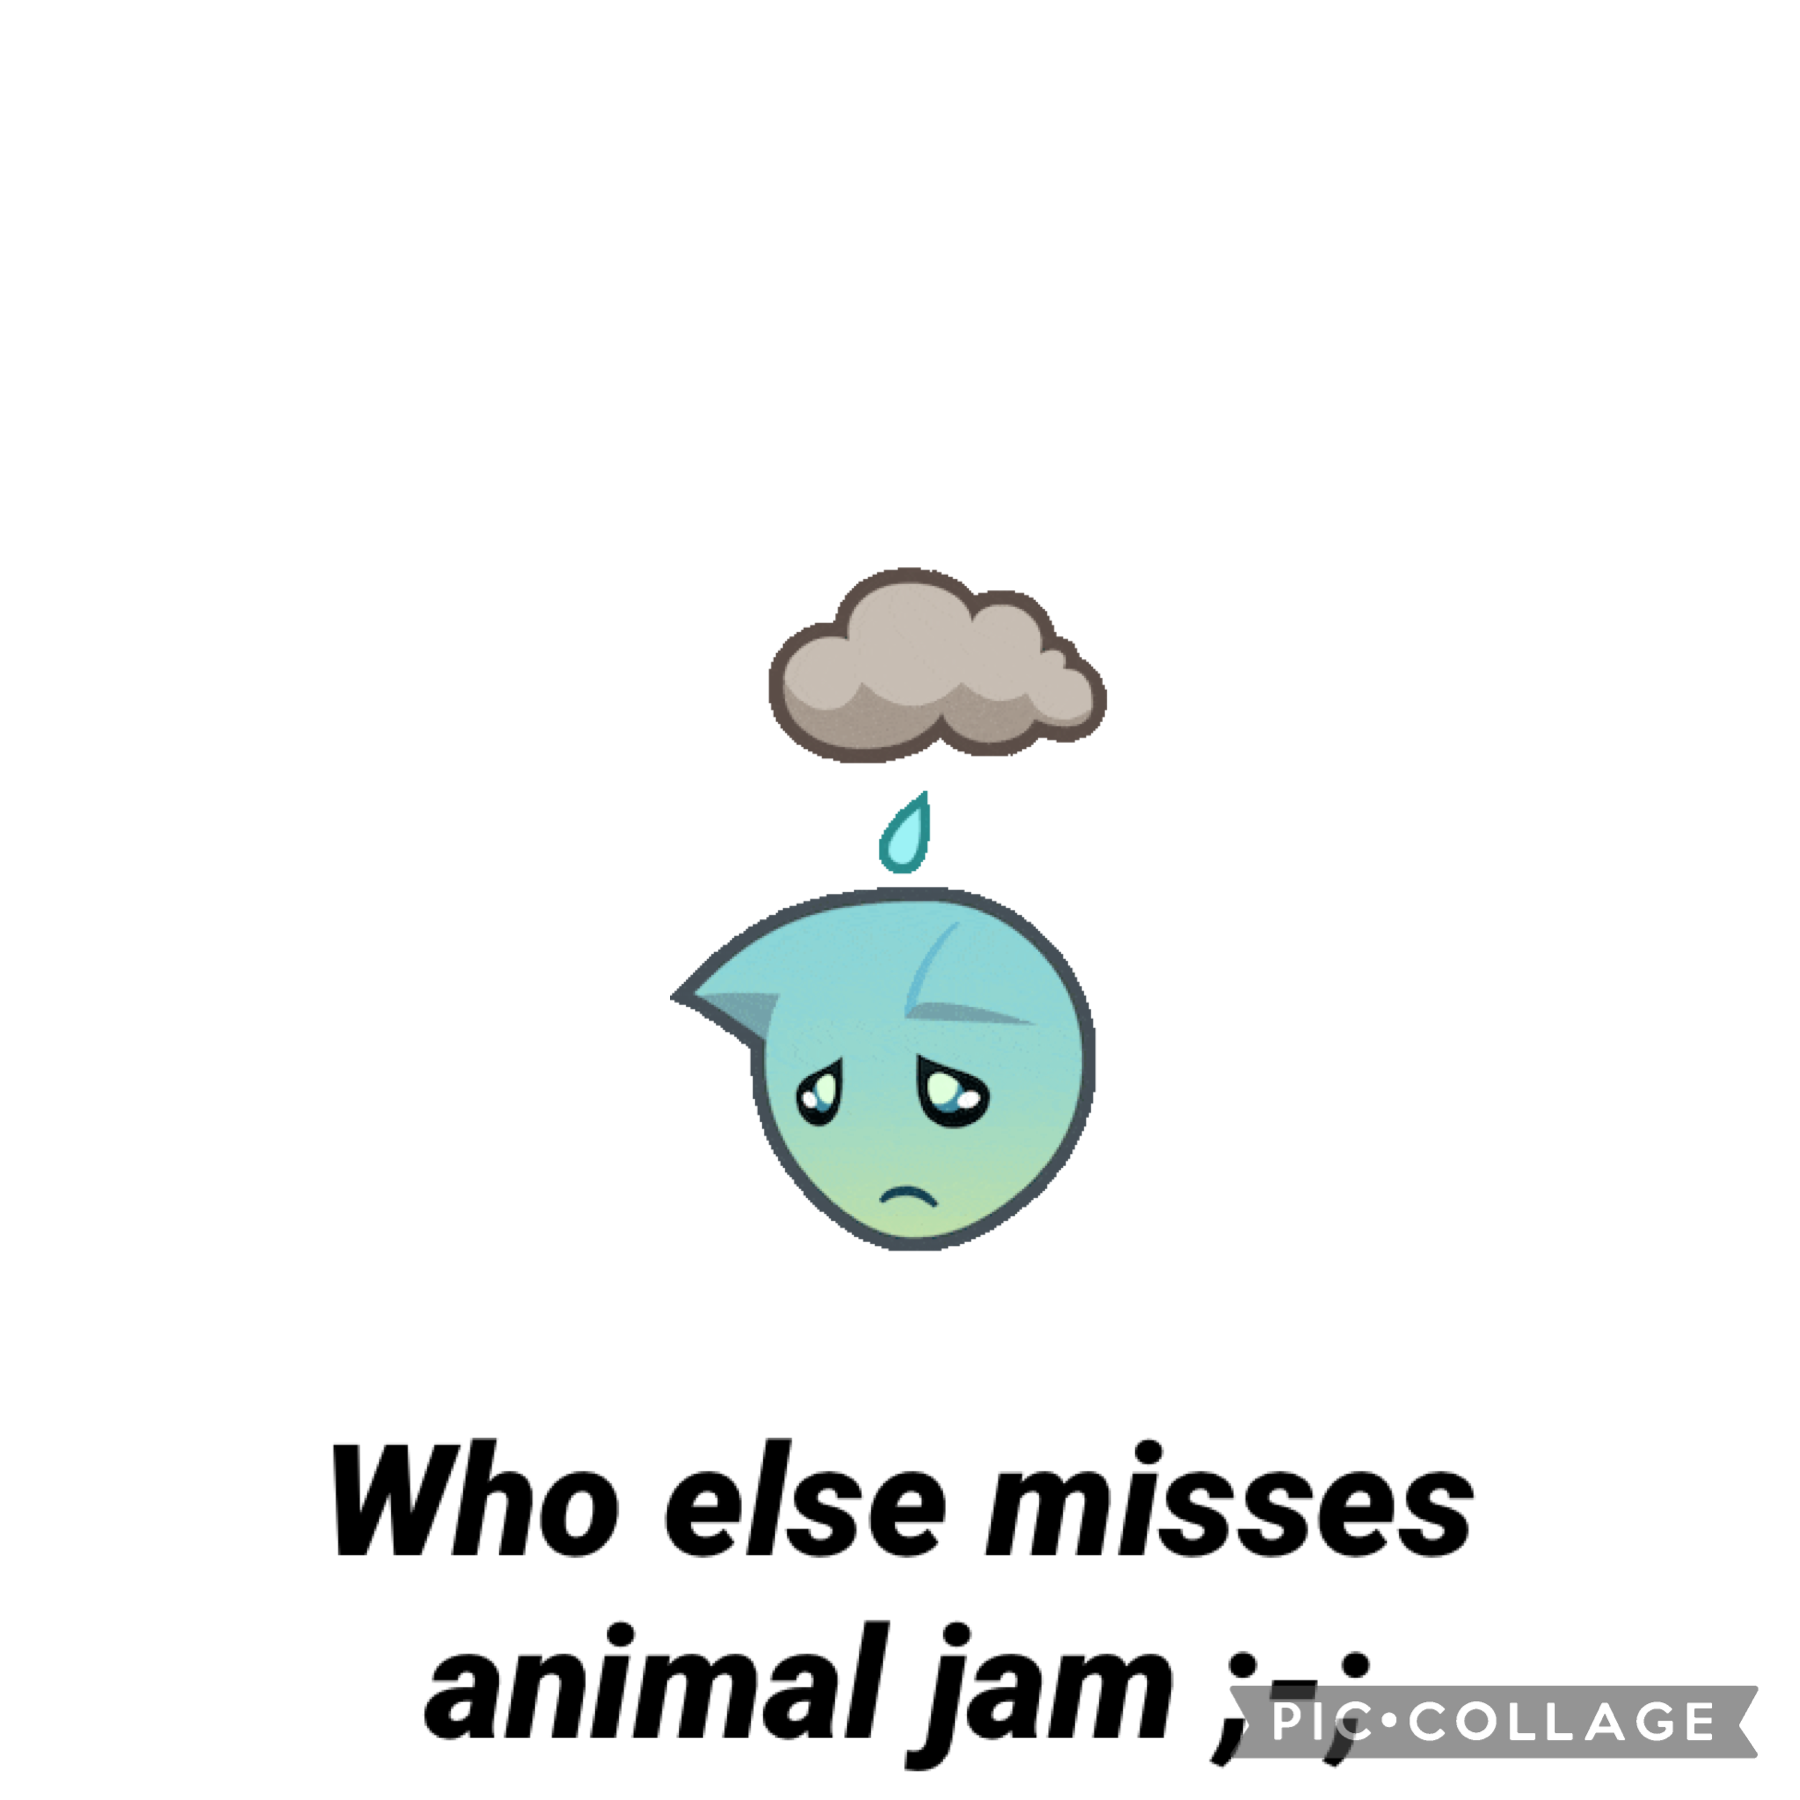 R.I.P animal jam because of flash also rip 